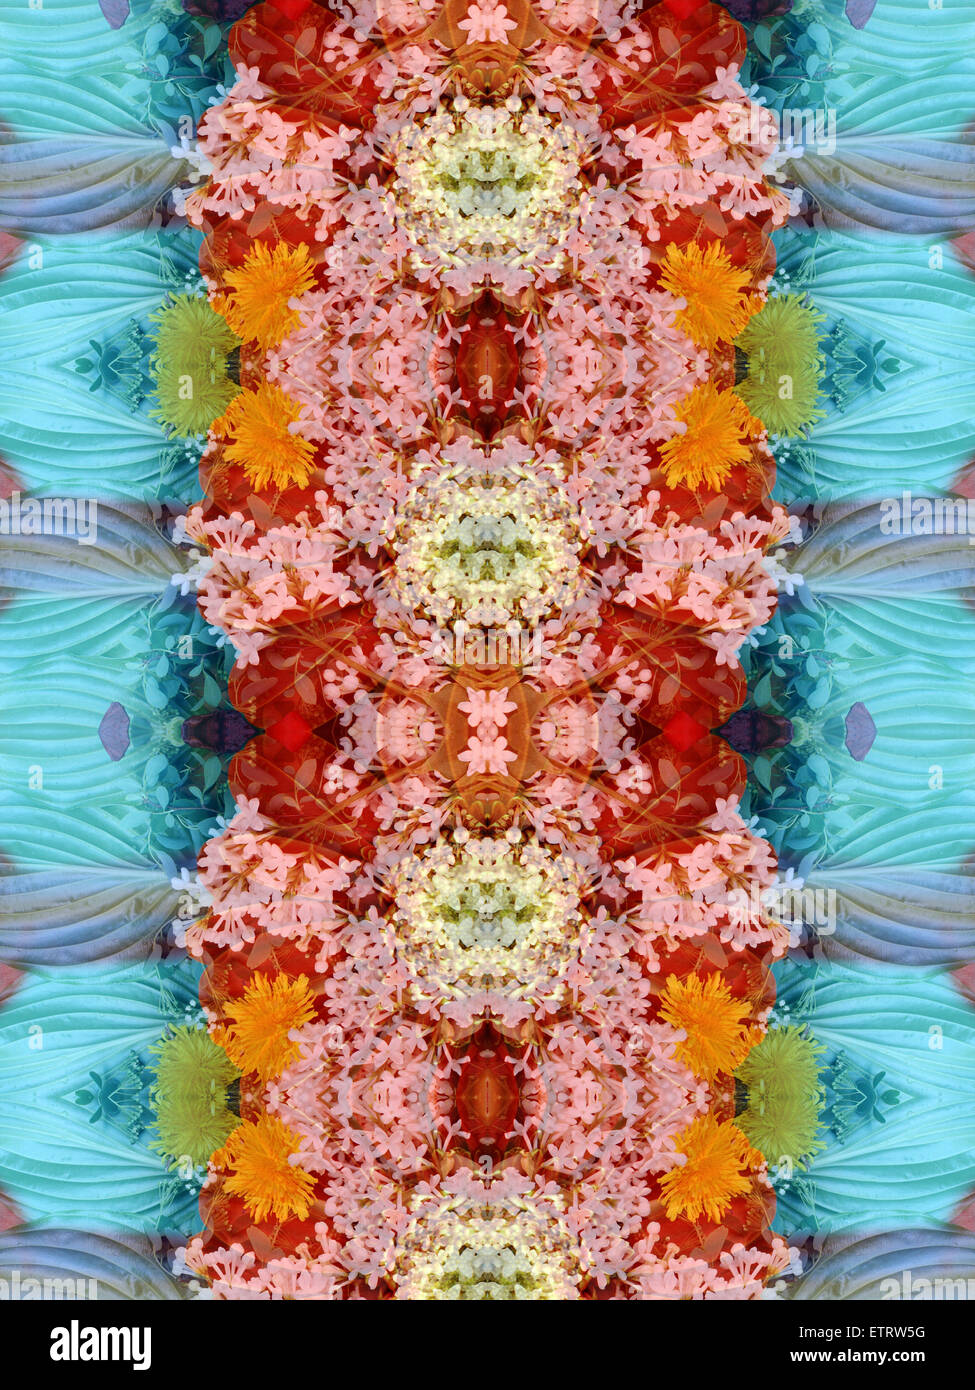 symmetric montage from flowers Stock Photo